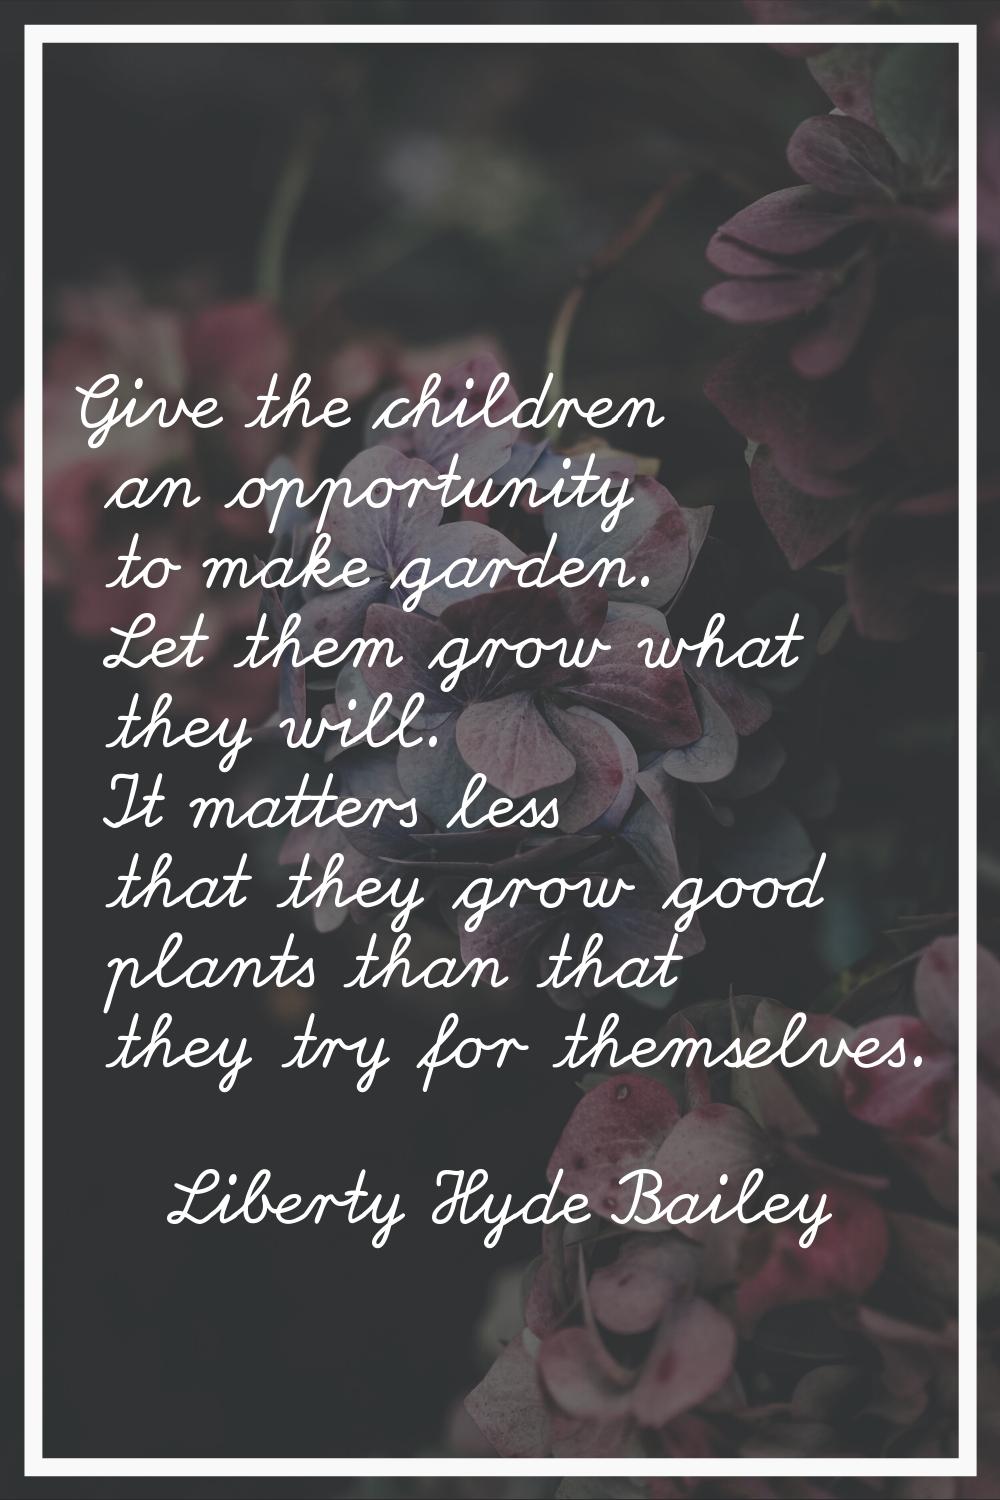 Give the children an opportunity to make garden. Let them grow what they will. It matters less that